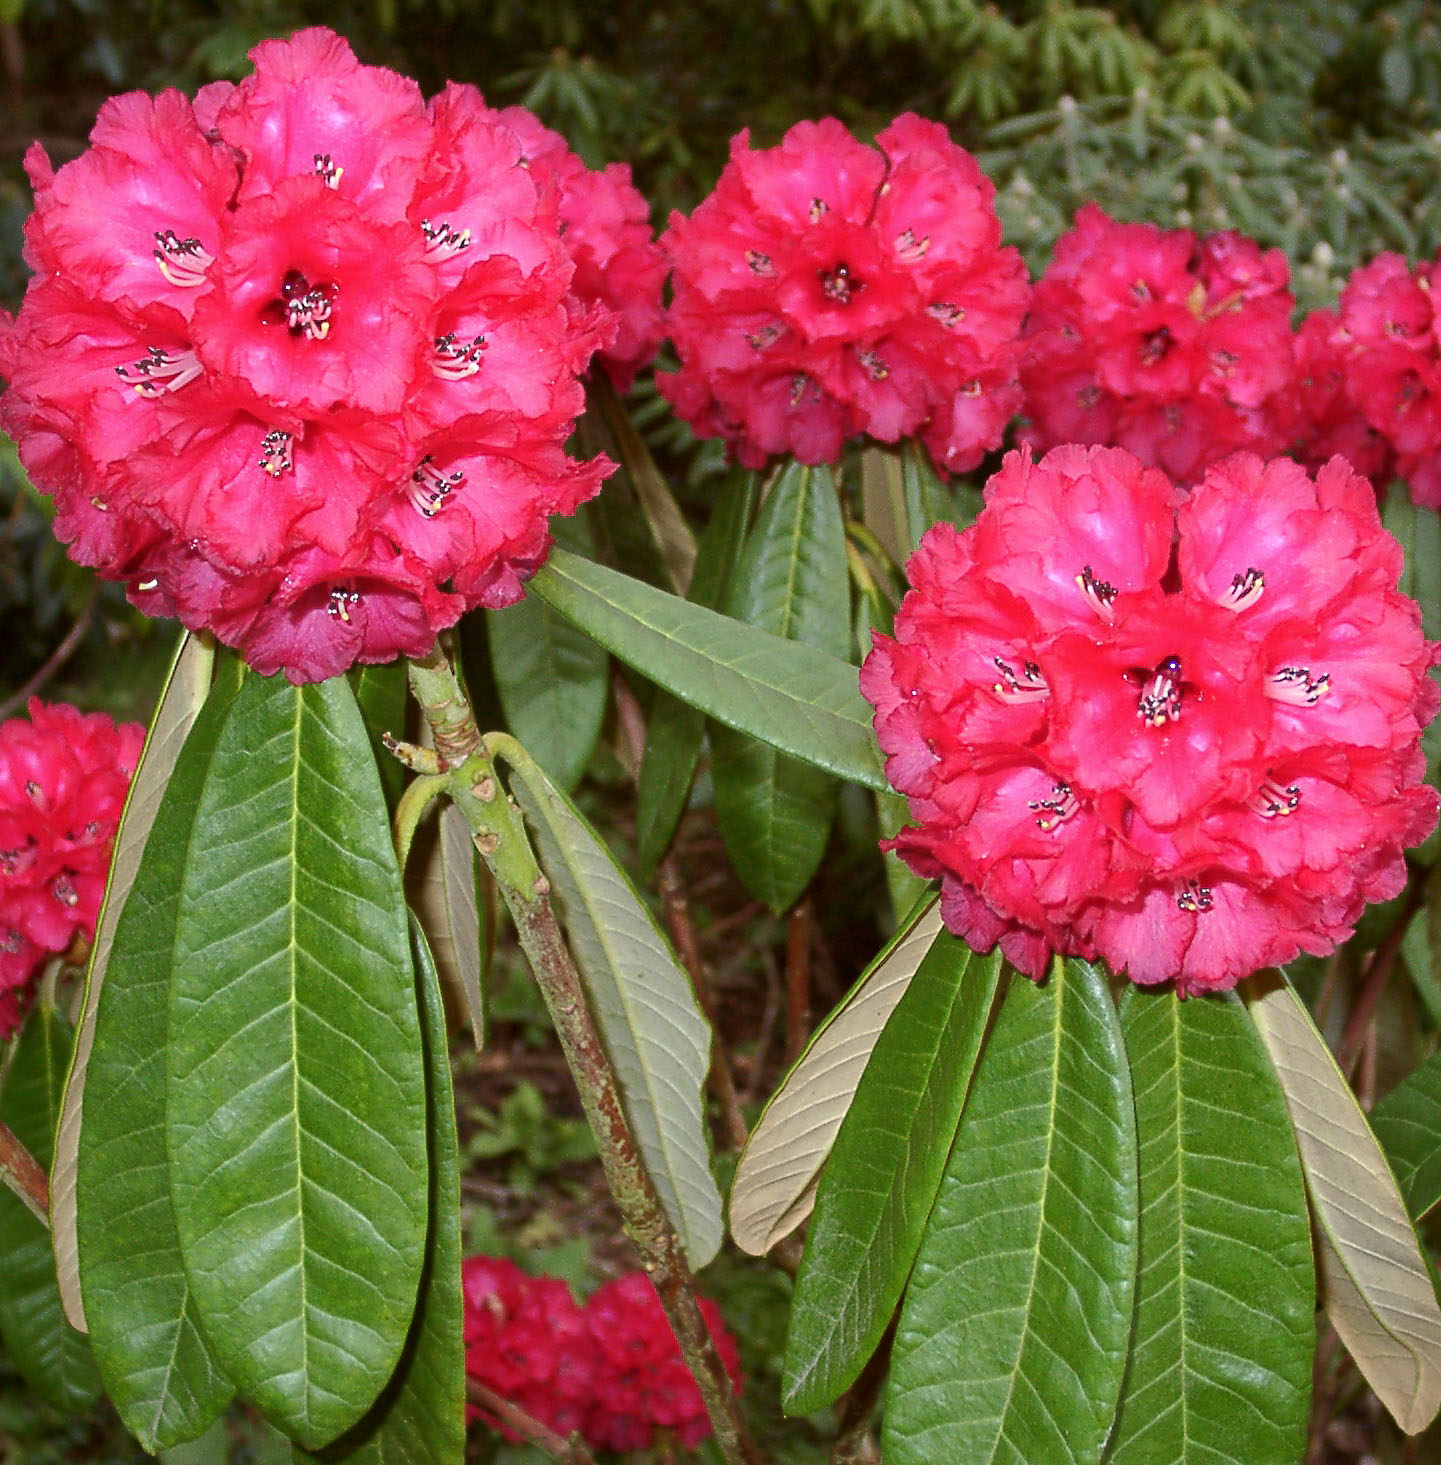 LANIGERUM Rhododendron Larger Species Rhododendrons